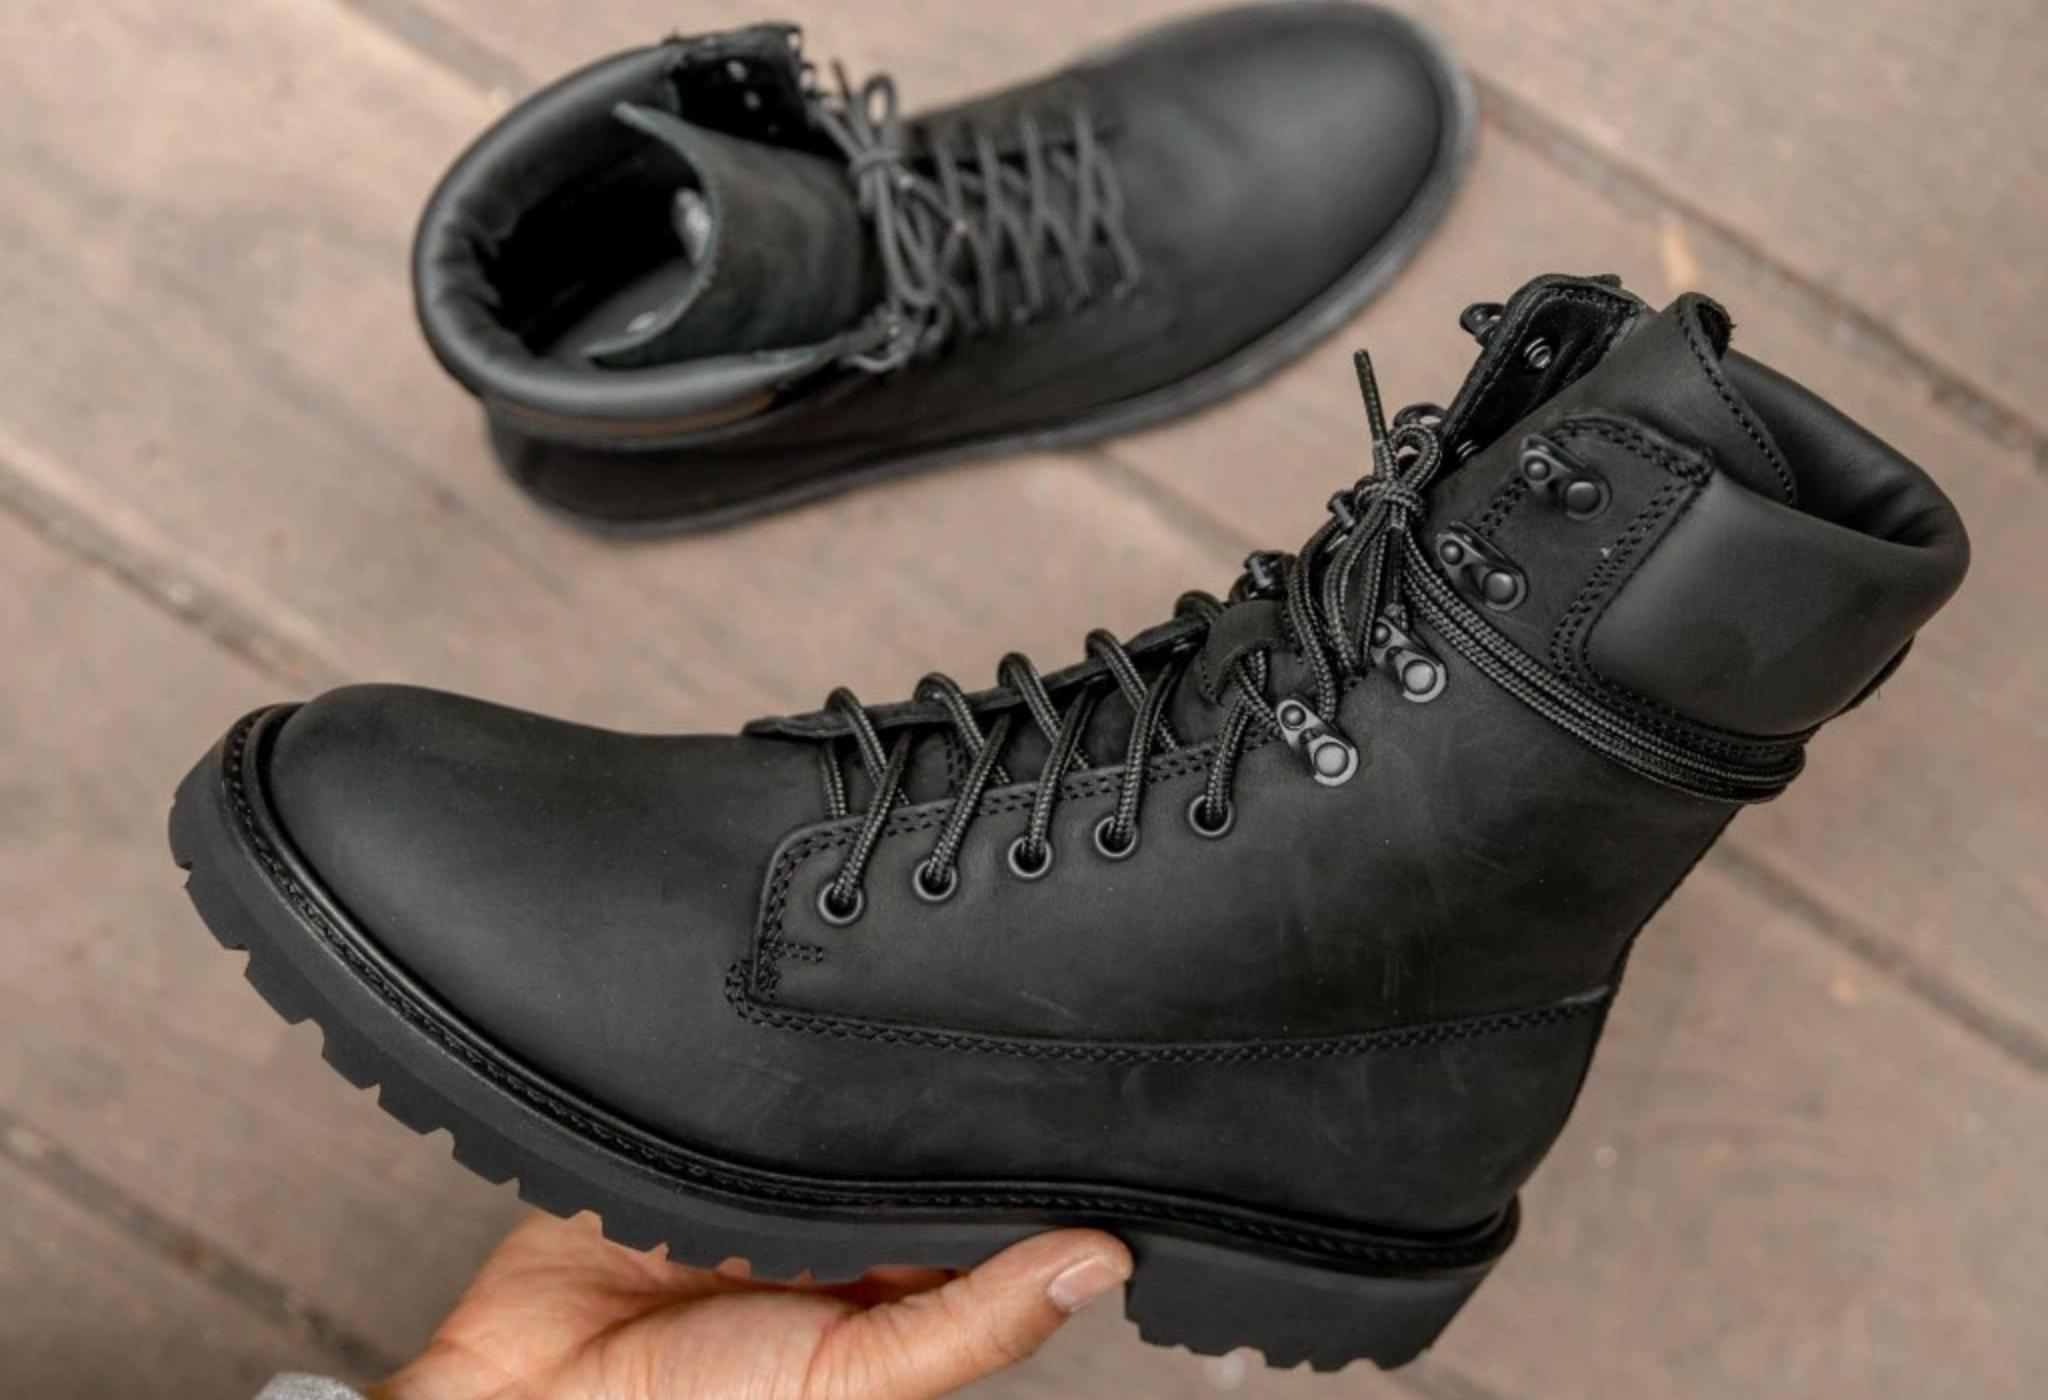 american combat boots is perfect casual shoe style for fall and winter